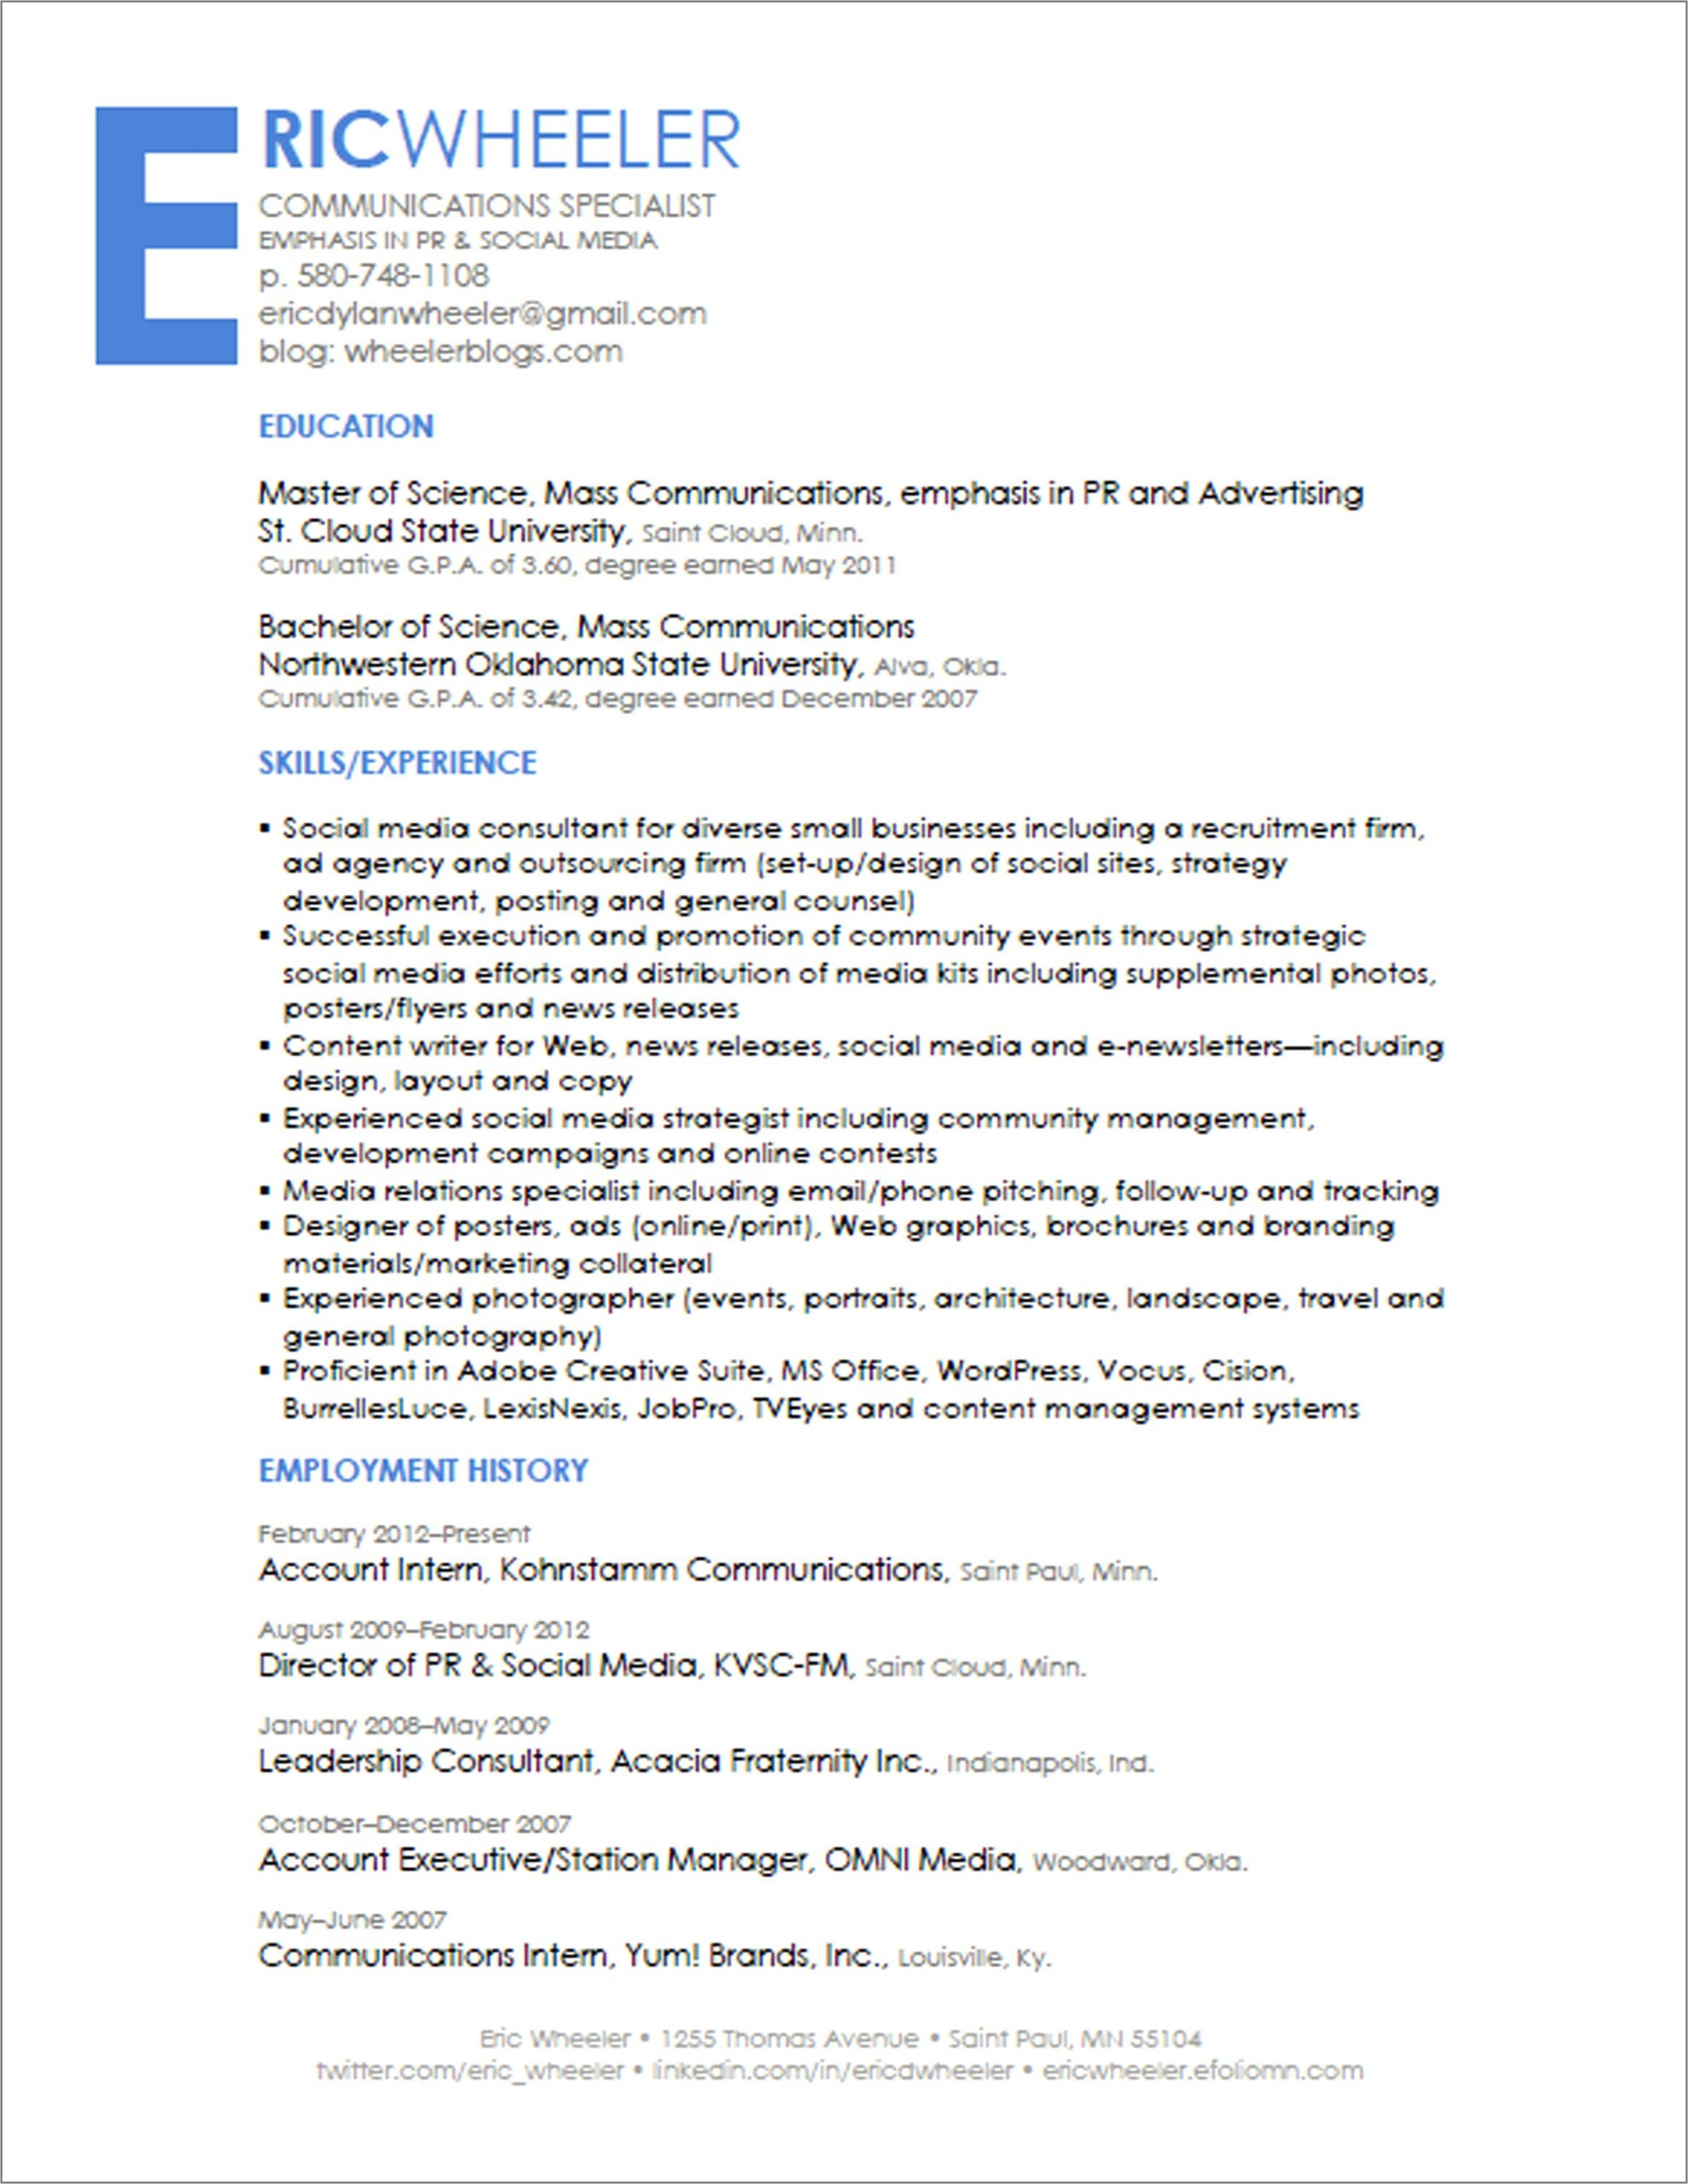 Marketing And Communications Consultant Resume Samples